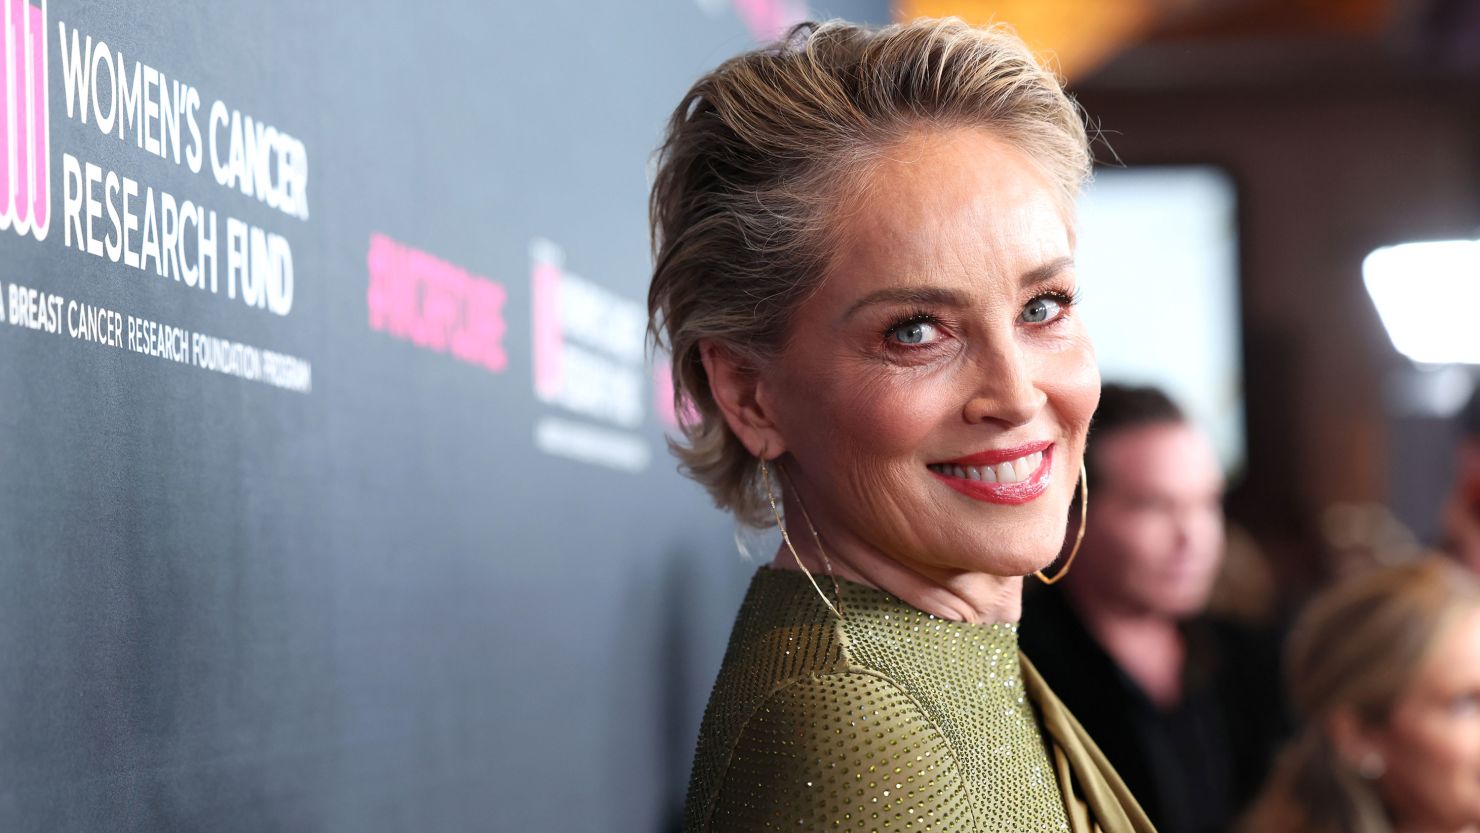 BEVERLY HILLS, CALIFORNIA - MARCH 16: Sharon Stone attends An Unforgettable Evening at Beverly Wilshire, A Four Seasons Hotel on March 16, 2023 in Beverly Hills, California. (Photo by Monica Schipper/Getty Images for WCRF)